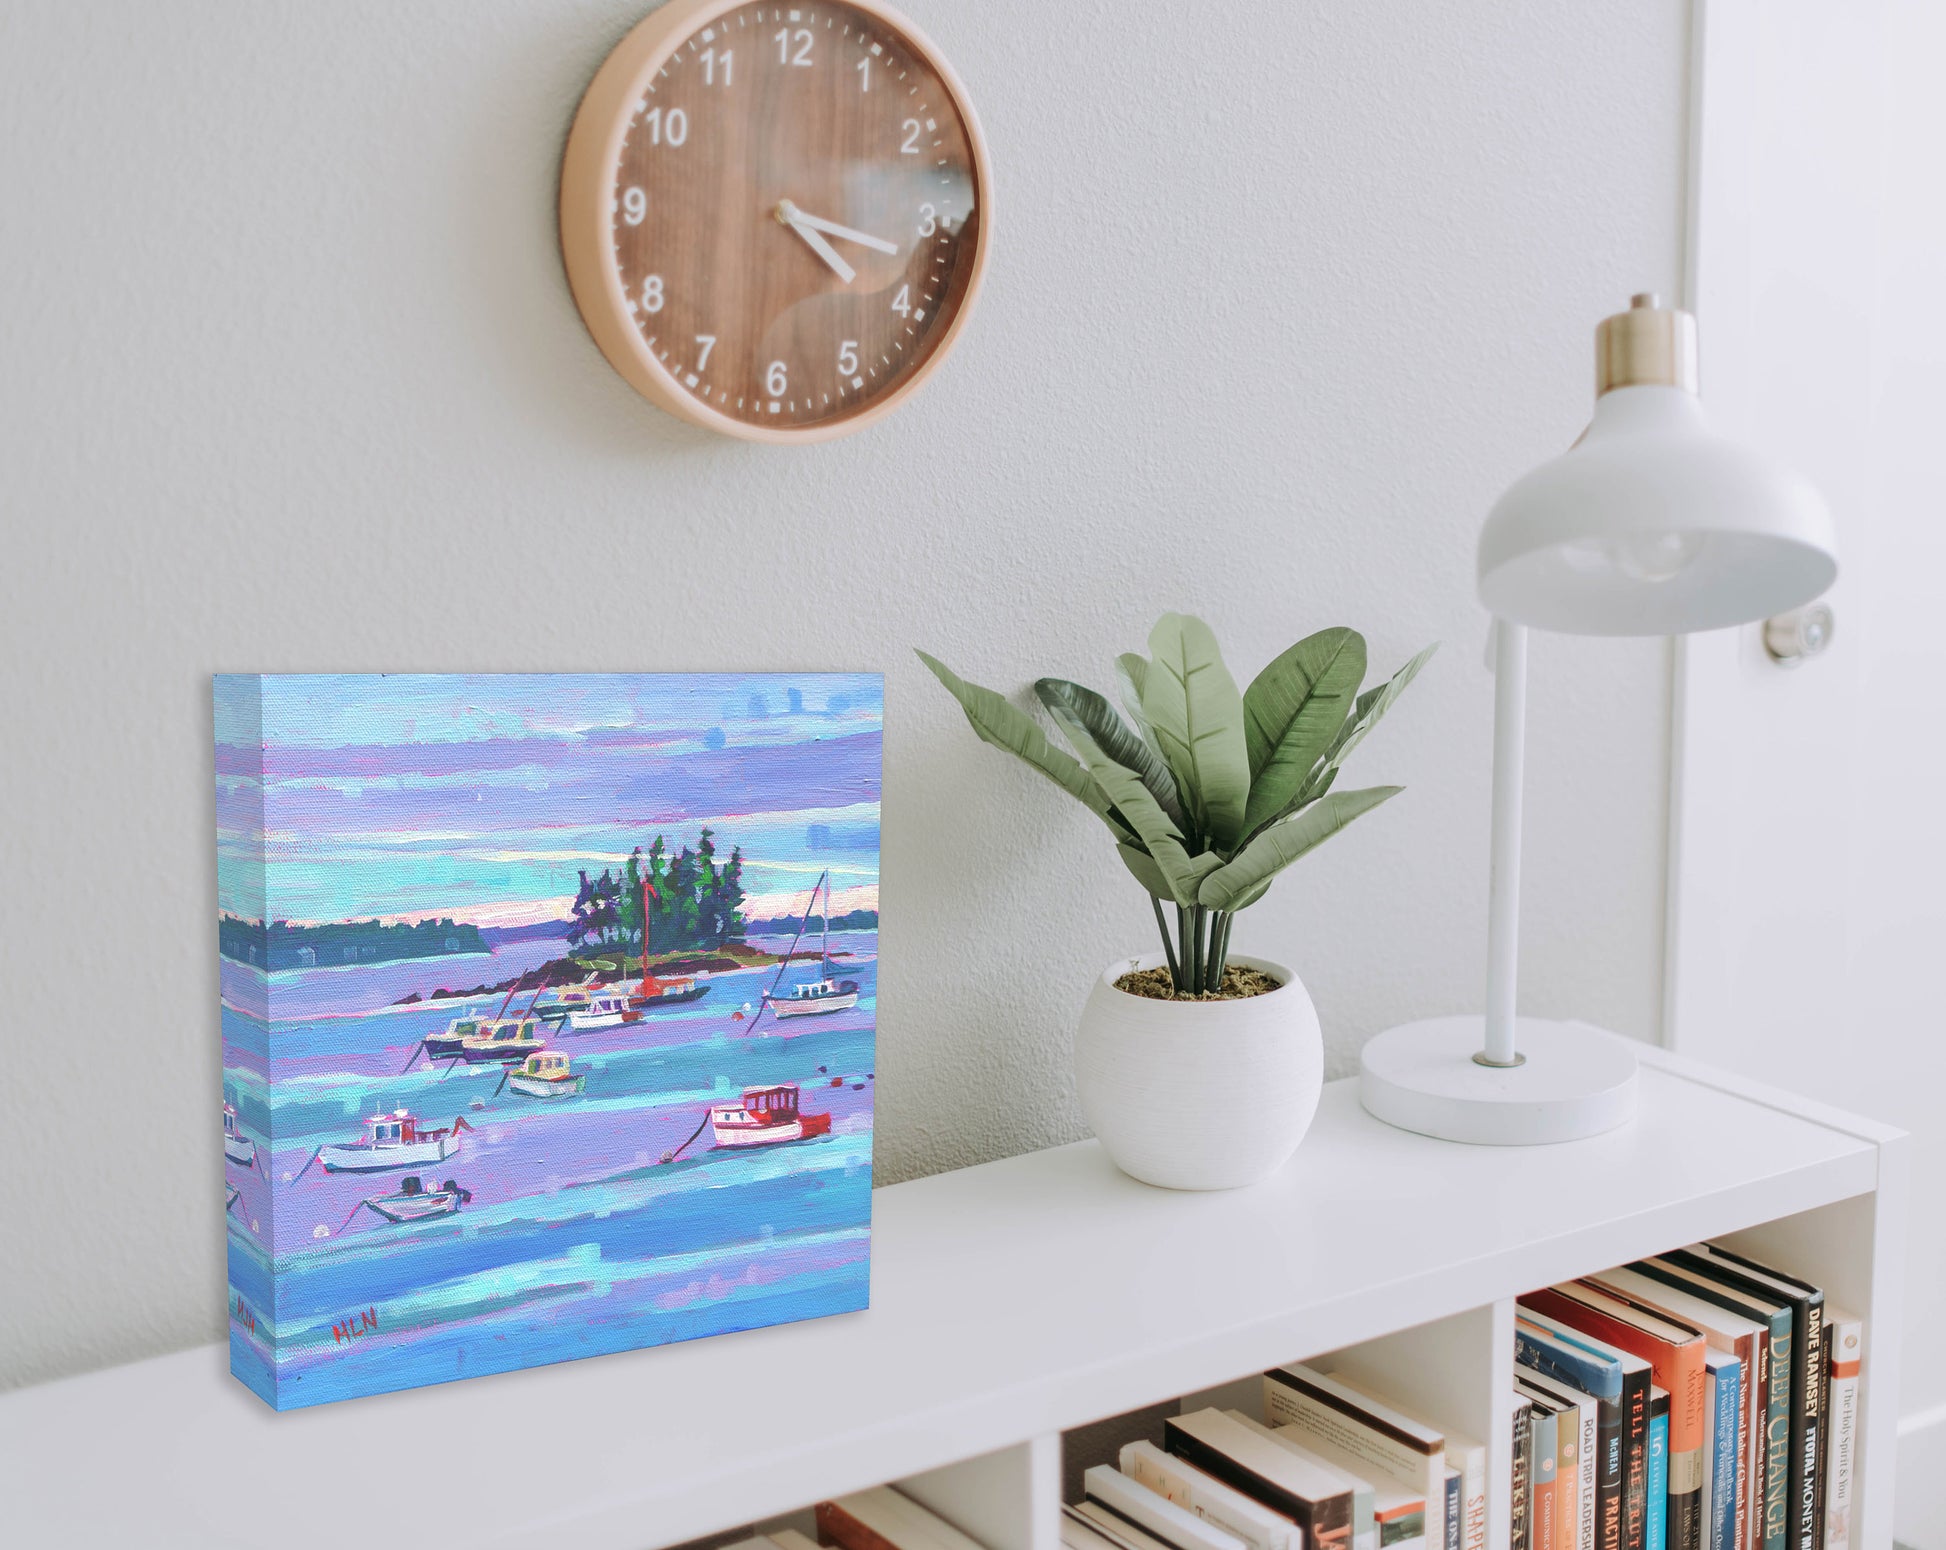 Lobster boats in harbor of Maine painting on bookshelf with clock